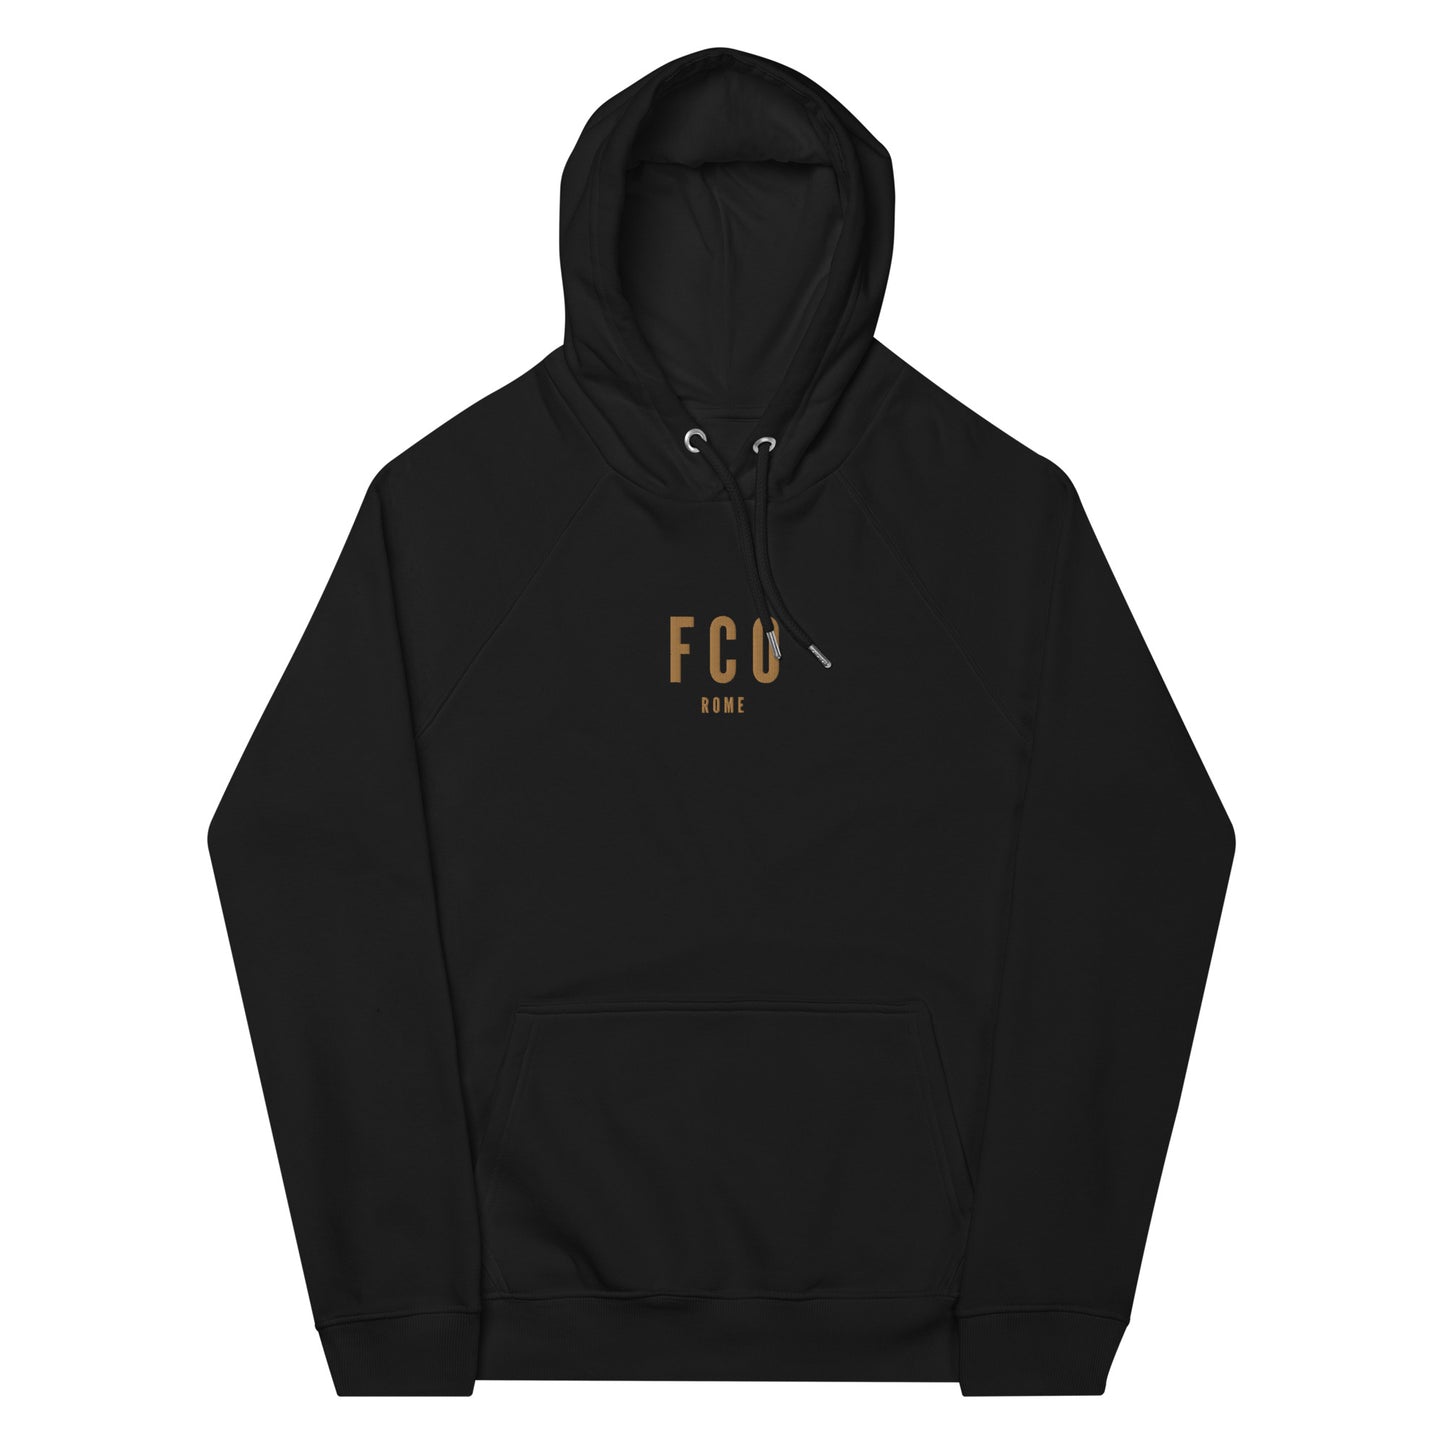 City Organic Hoodie - Old Gold • FCO Rome • YHM Designs - Image 10